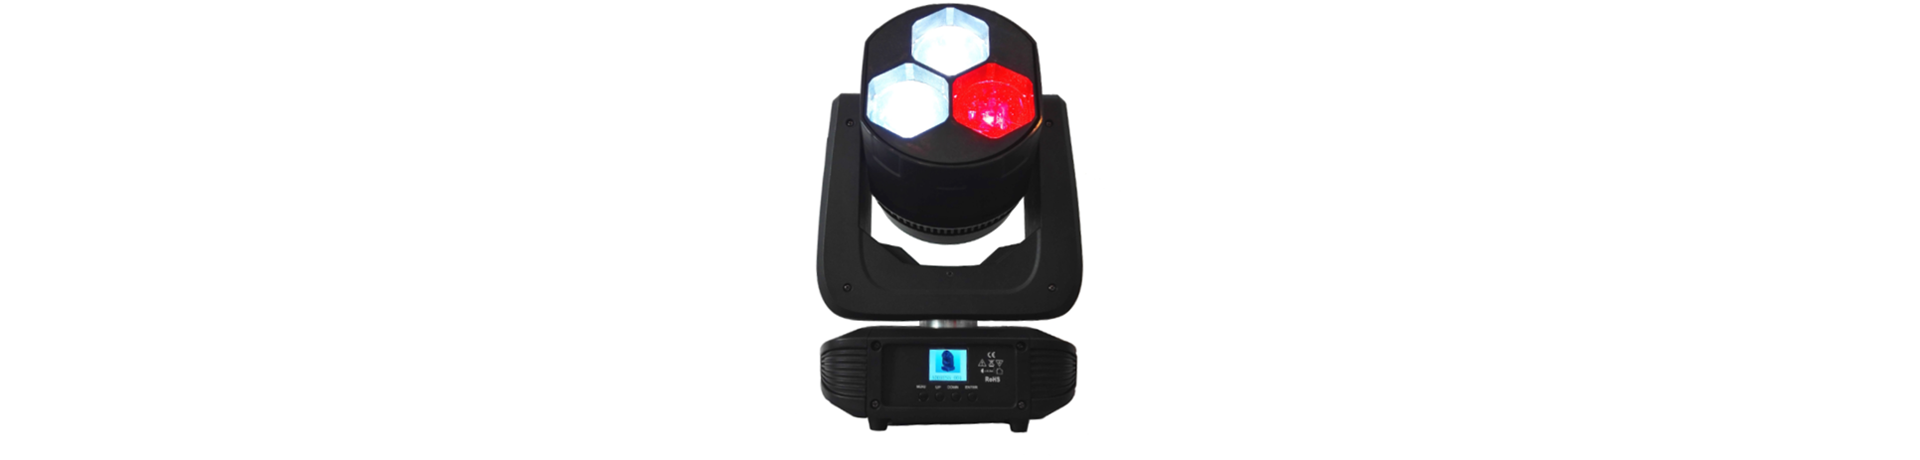 LED Moving Head Zoom 3